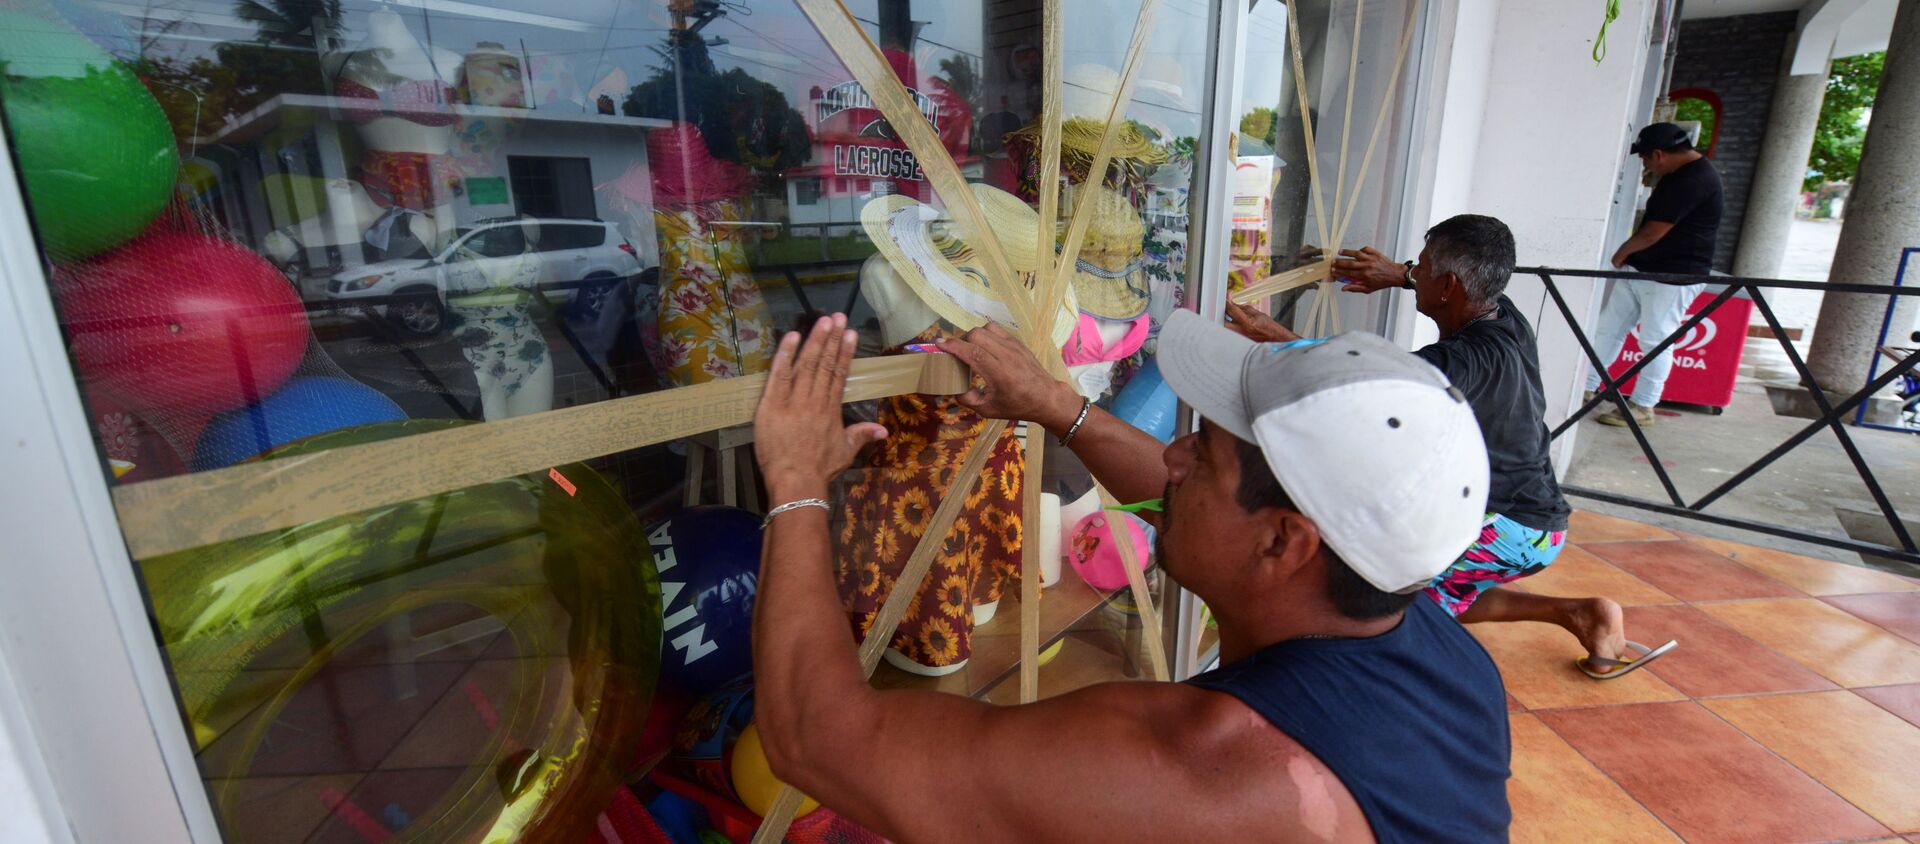 Shop owners protect the windows of their stores as Hurricane Grace gathered more strength before reaching land, in Tecolutla, Mexico August 20, 2021.  - Sputnik International, 1920, 21.08.2021